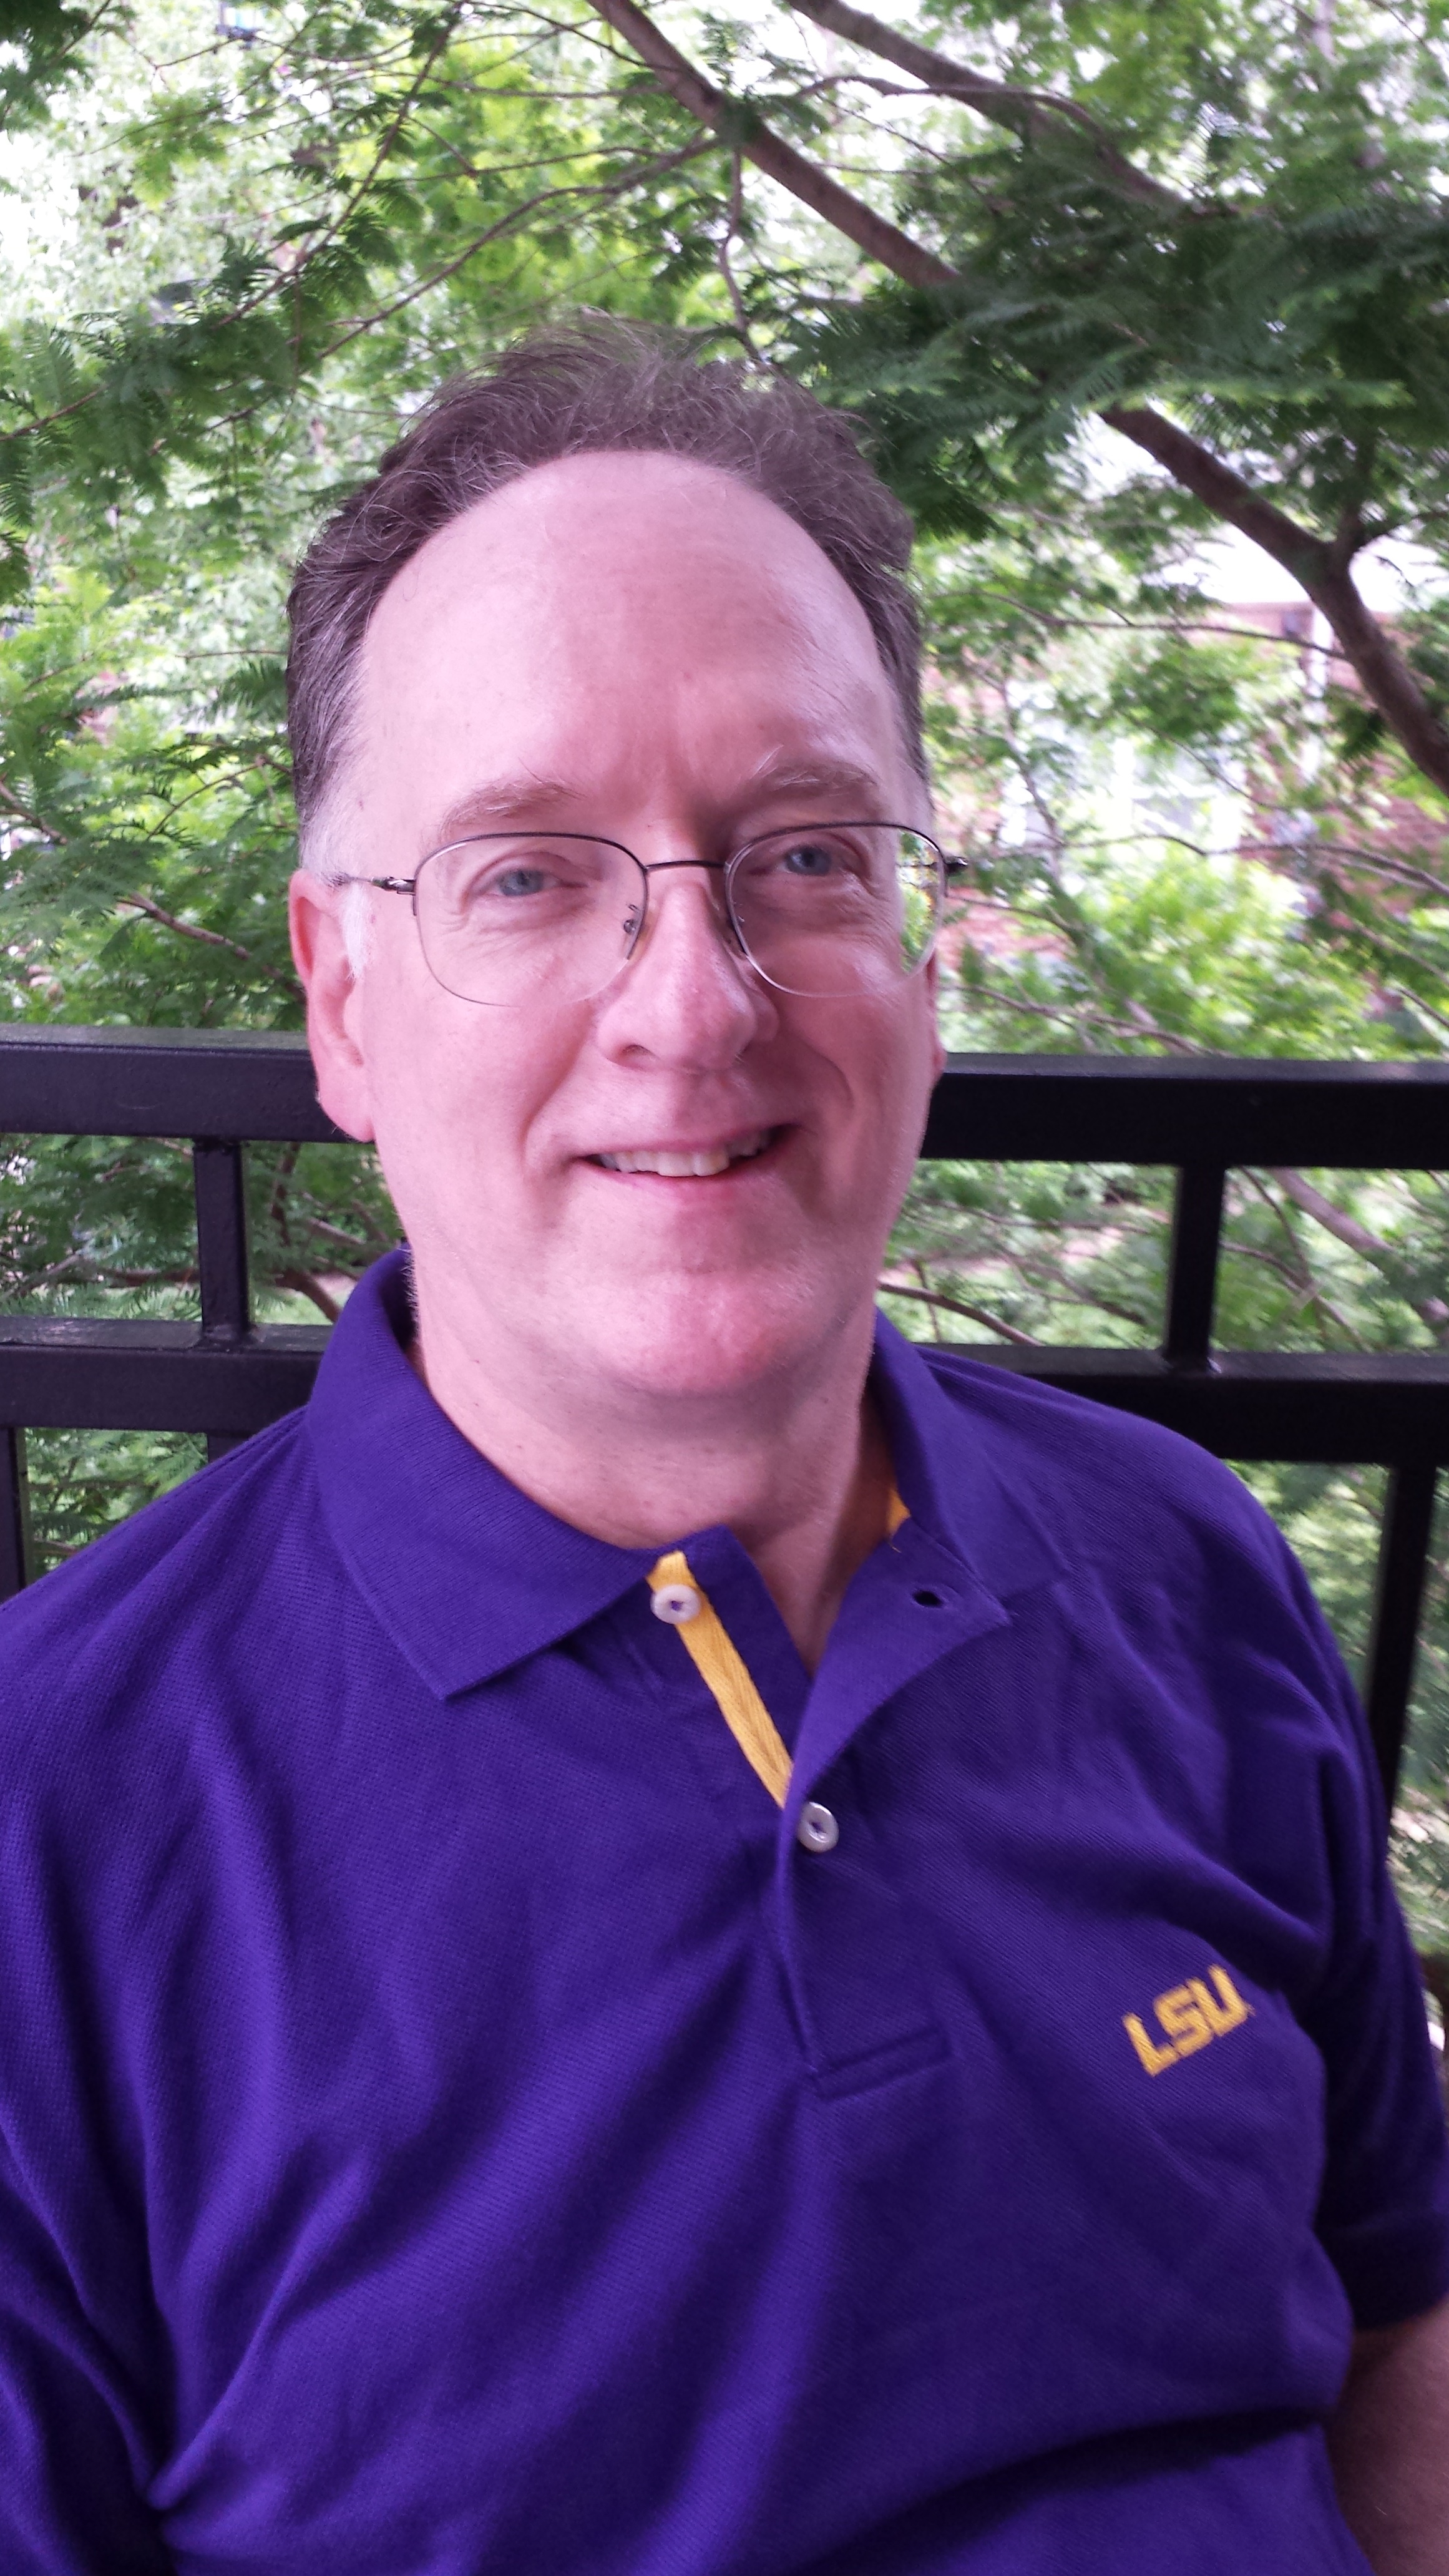 About Steve Buttry - steve-in-lsu-shirt